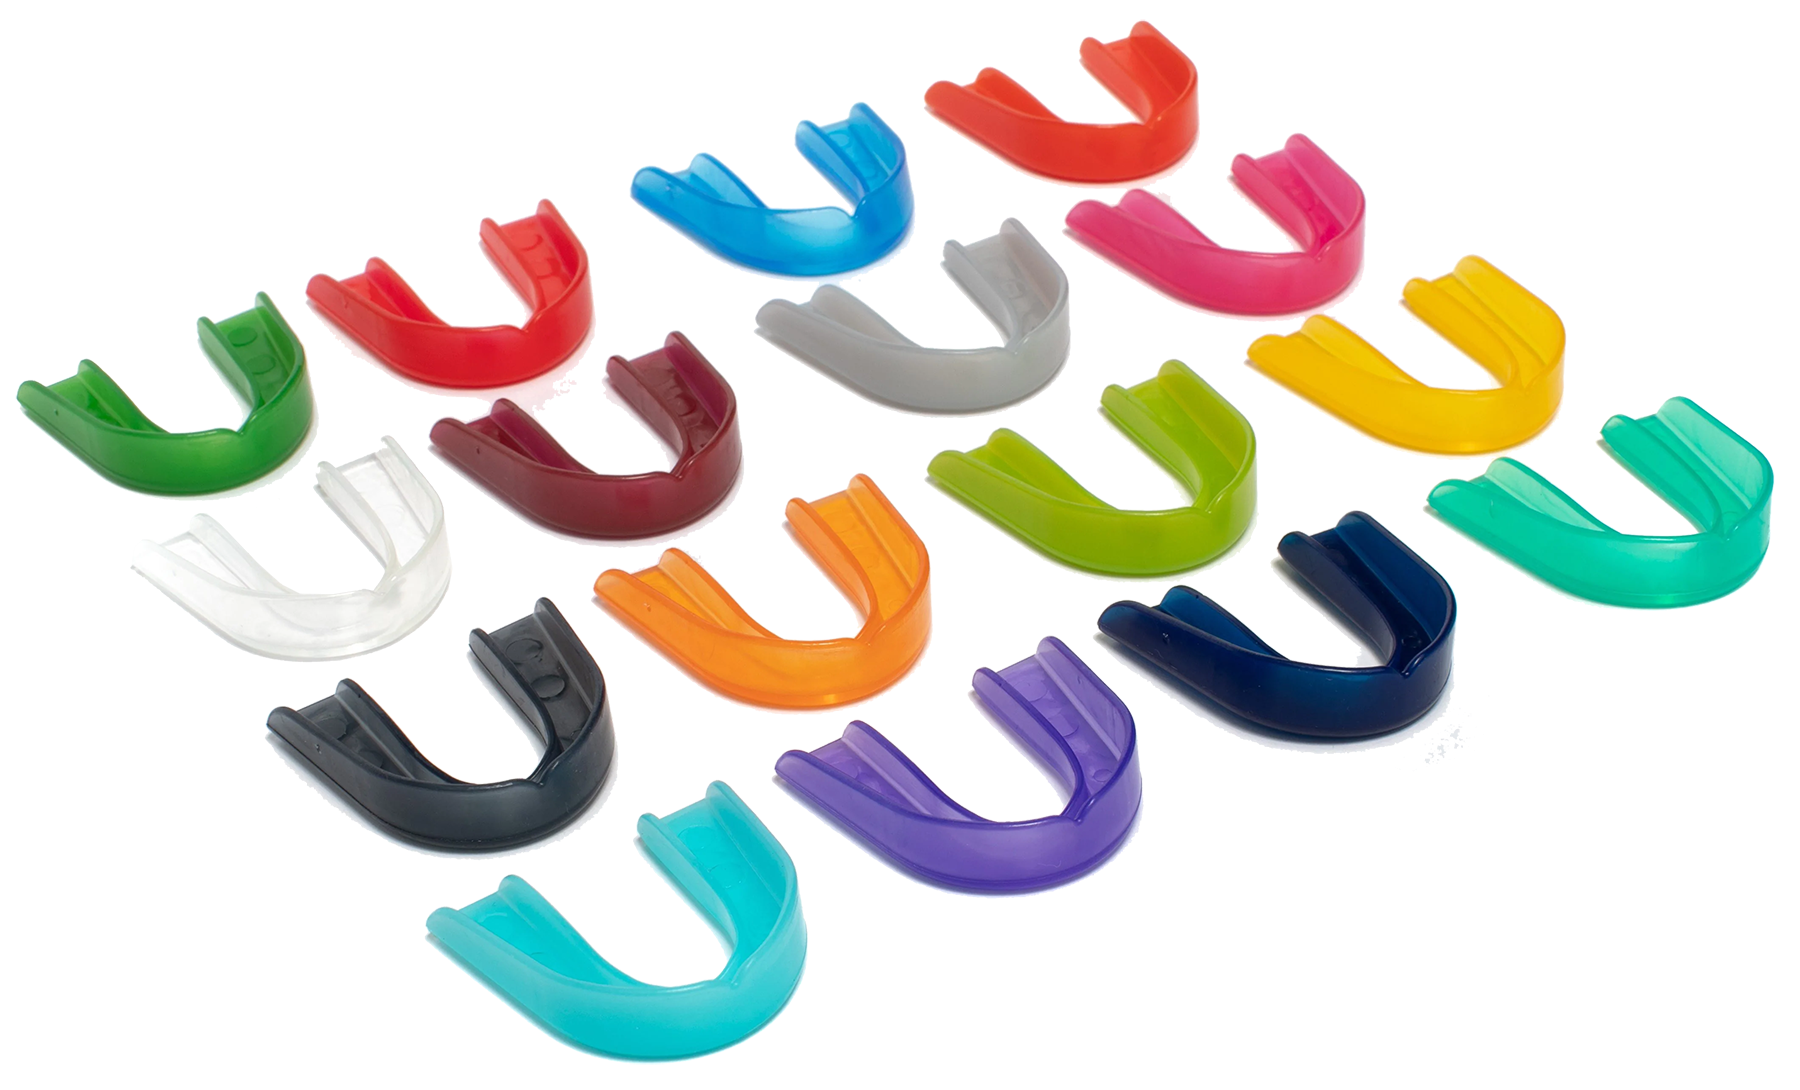 A set of 16 differently colors mouth guards without straps